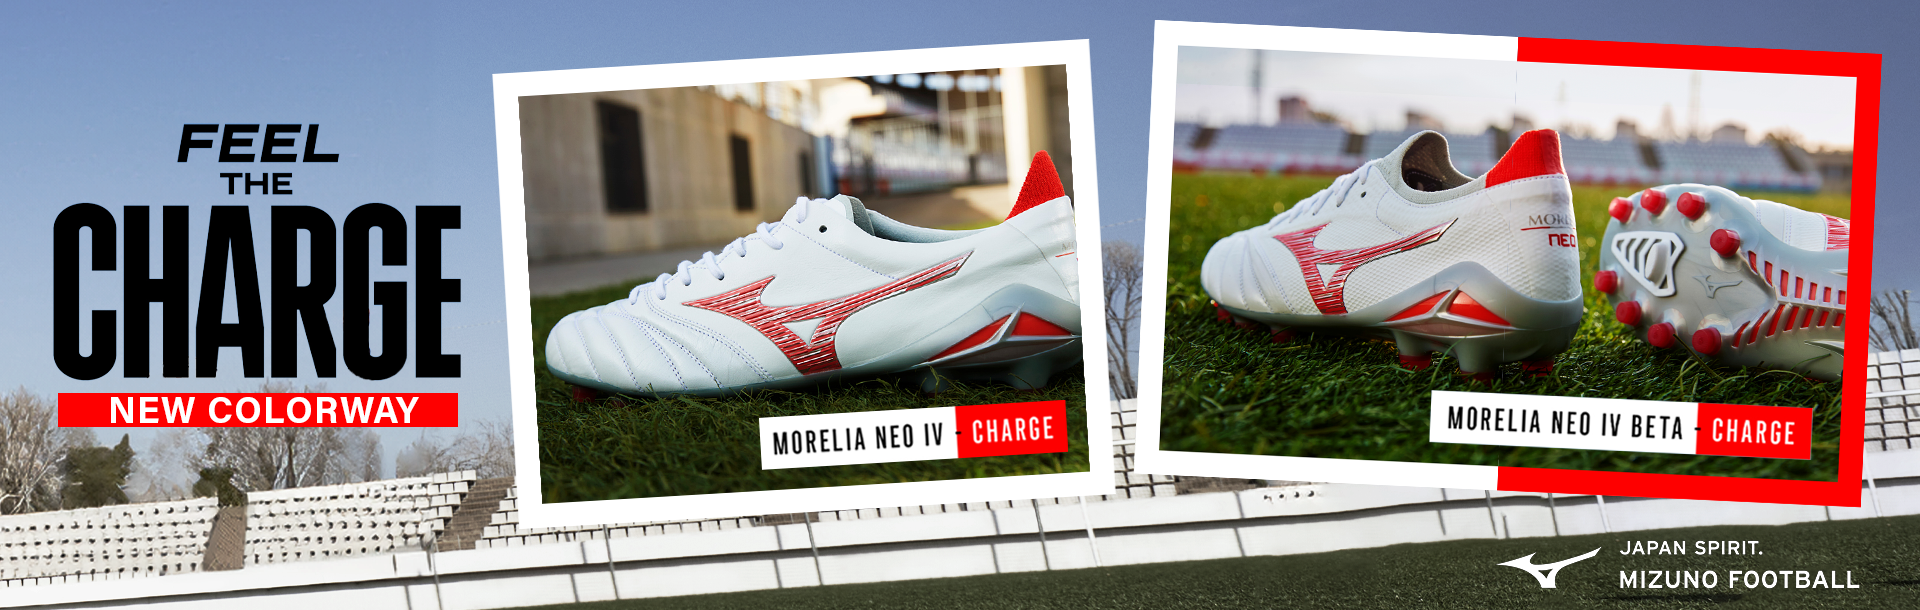 MORELIA NEO IV CHARGE PACK